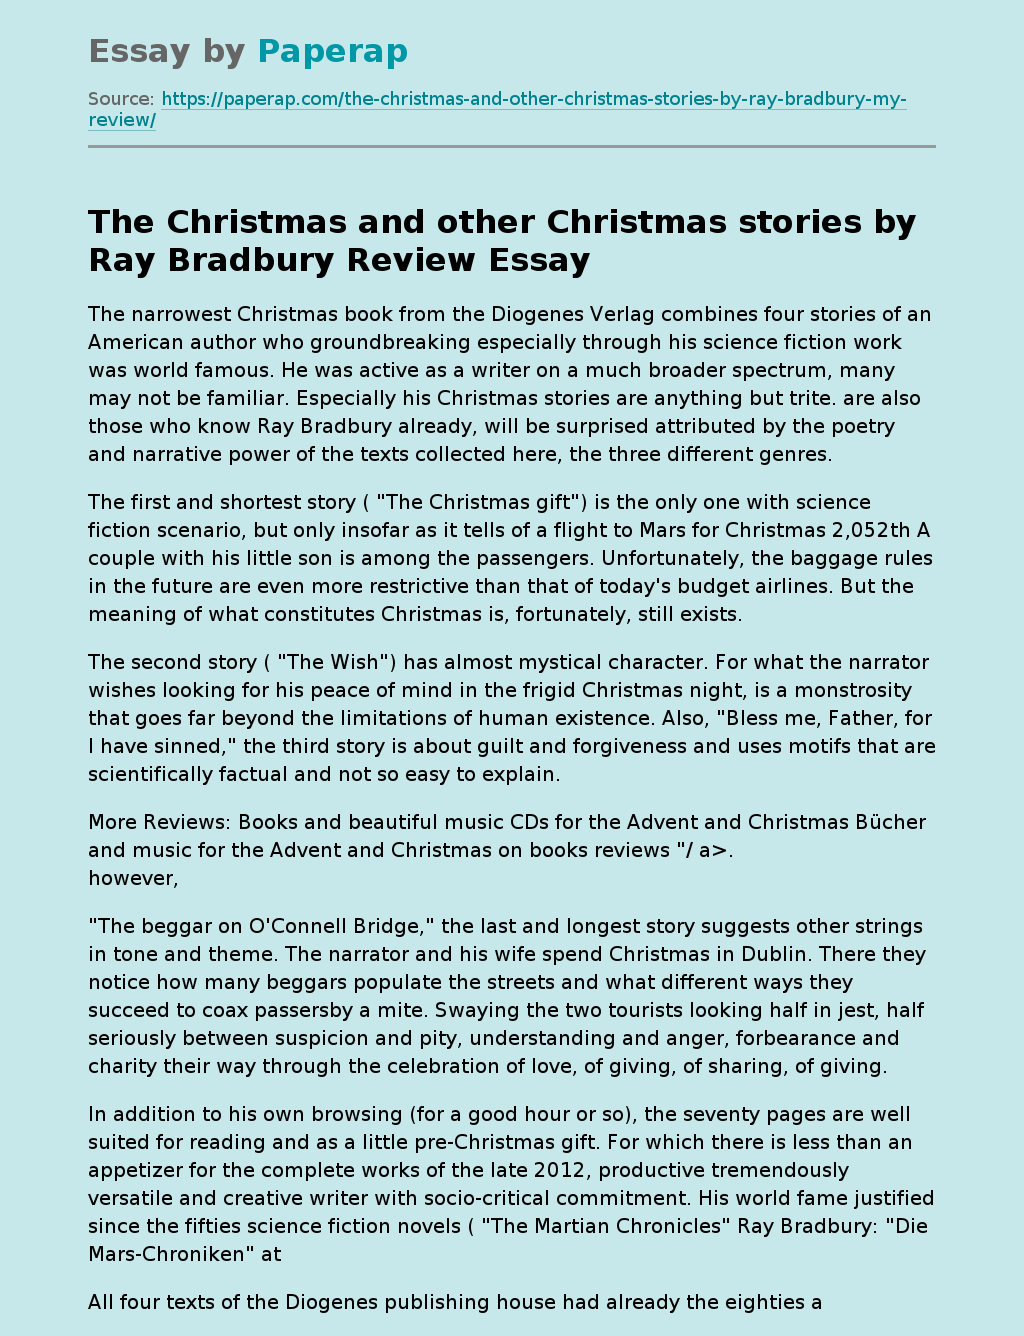 The Christmas and other Christmas stories by Ray Bradbury Review